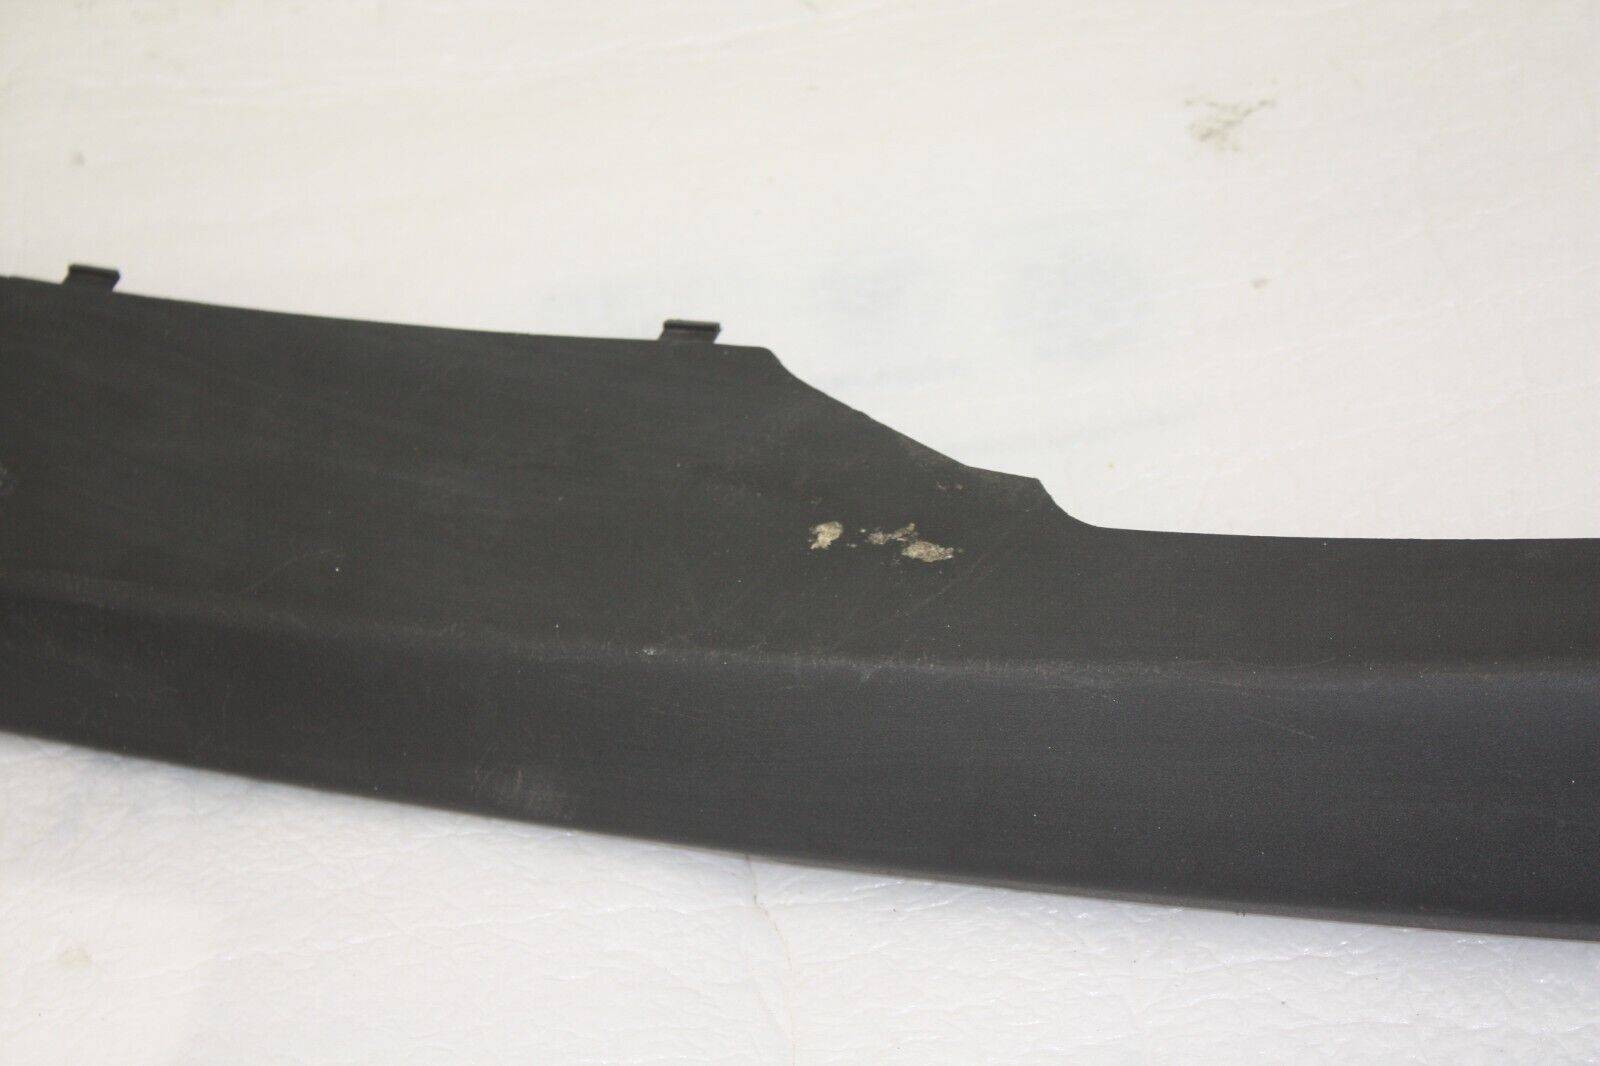 Ford-Fiesta-Front-Bumper-Lower-Section-1999-TO-2002-YS61-17B970-A-Genuine-176384517432-6